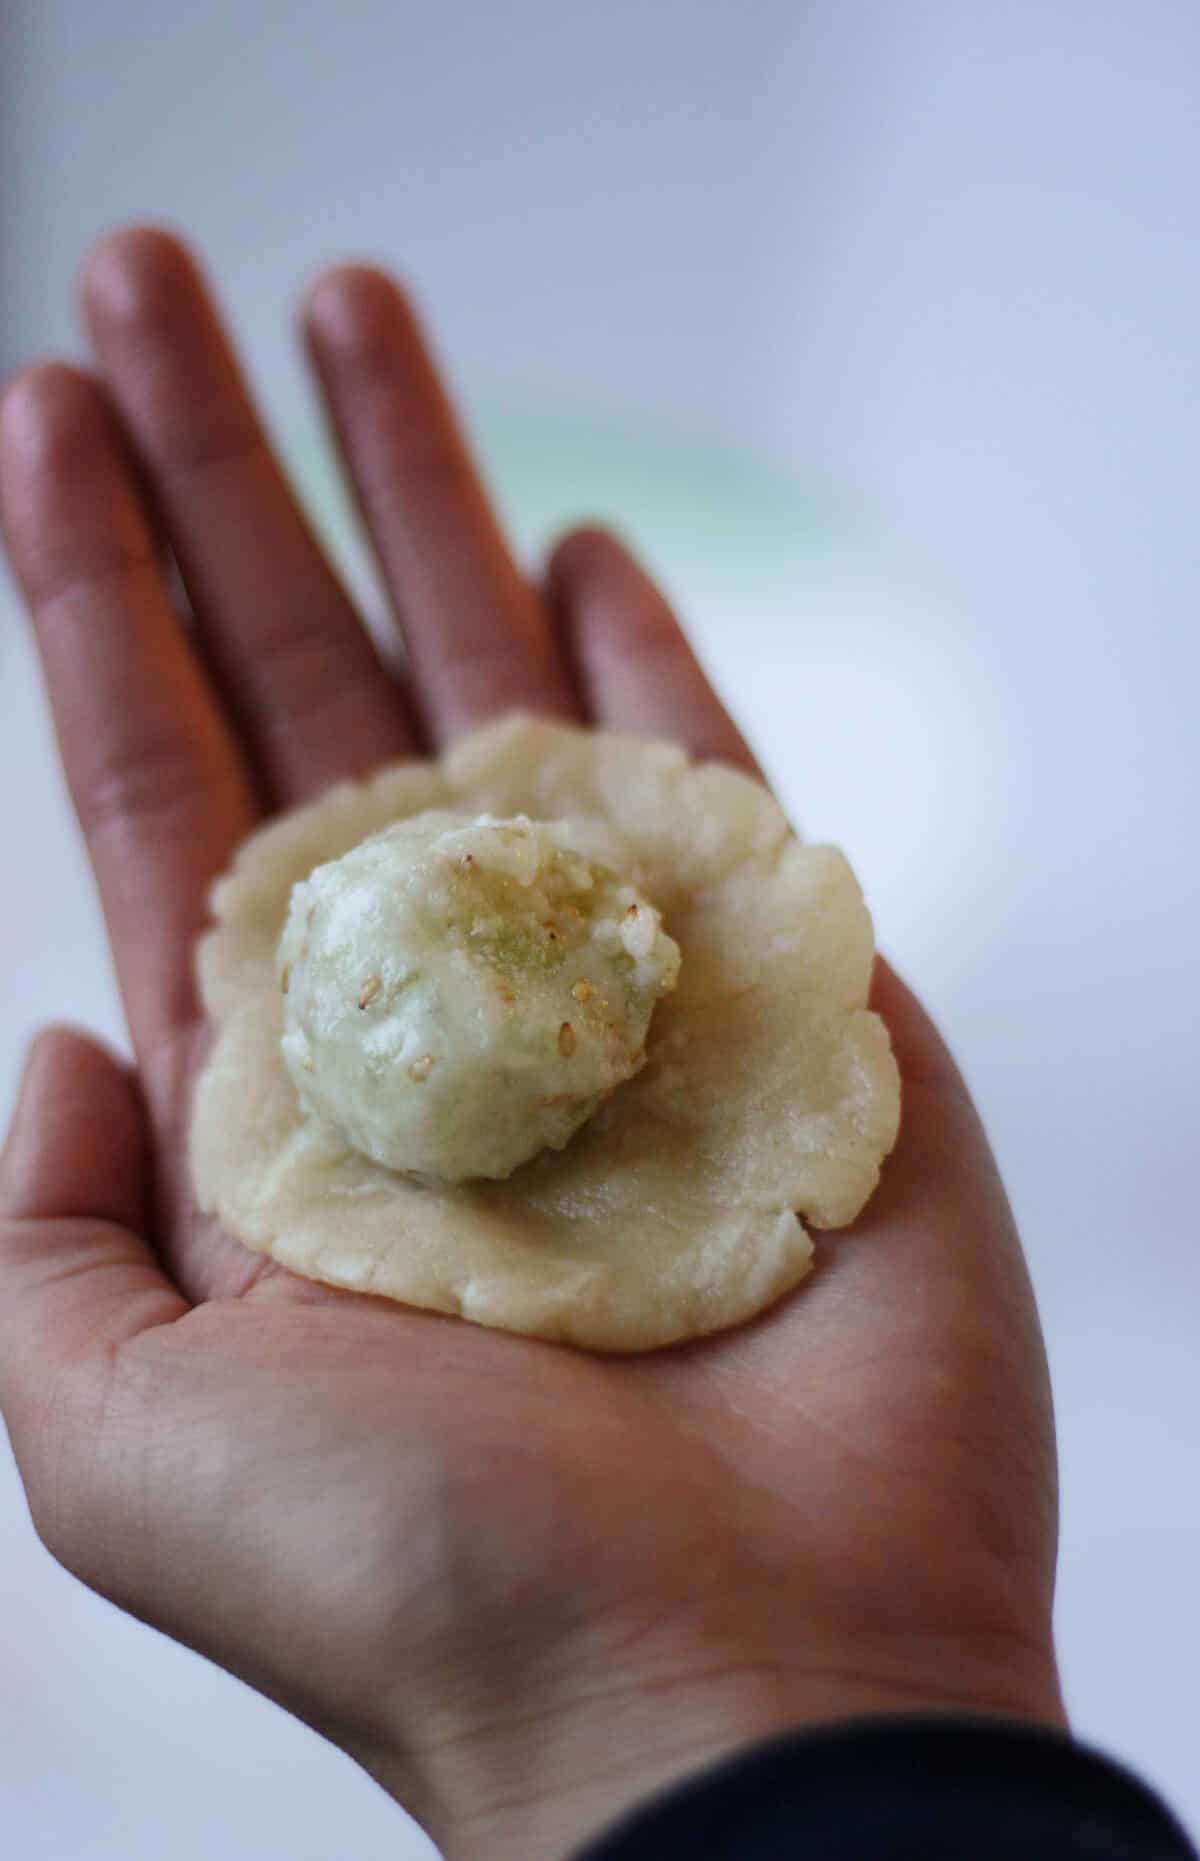 A piece of flattened pastry dough with a ball of wintermelon filling in someone's palm.